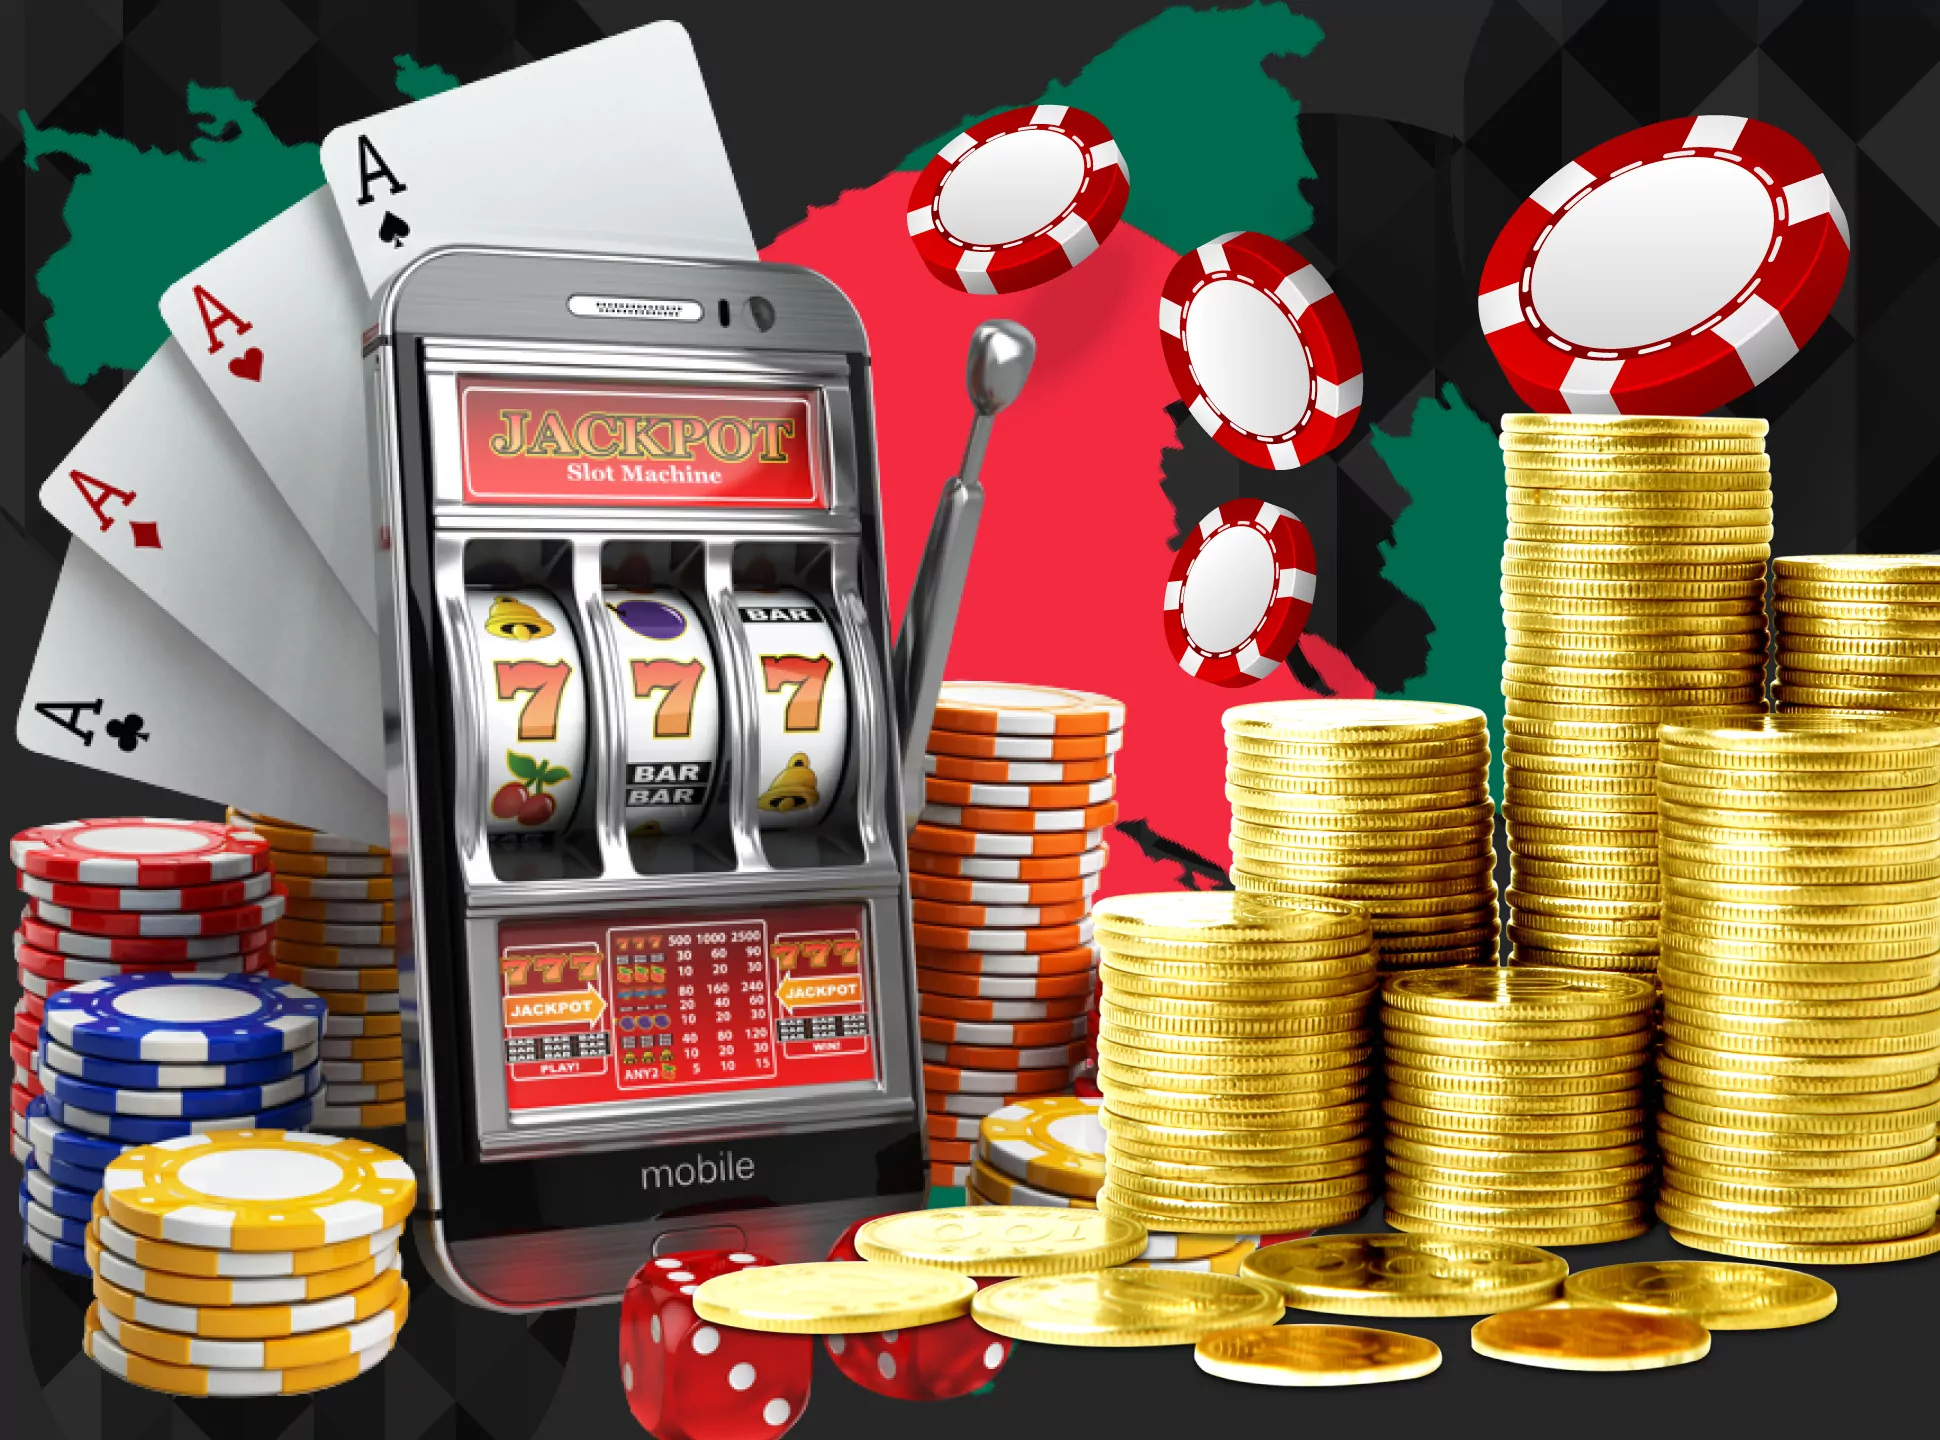 Be responsible while playing casino games on real money.